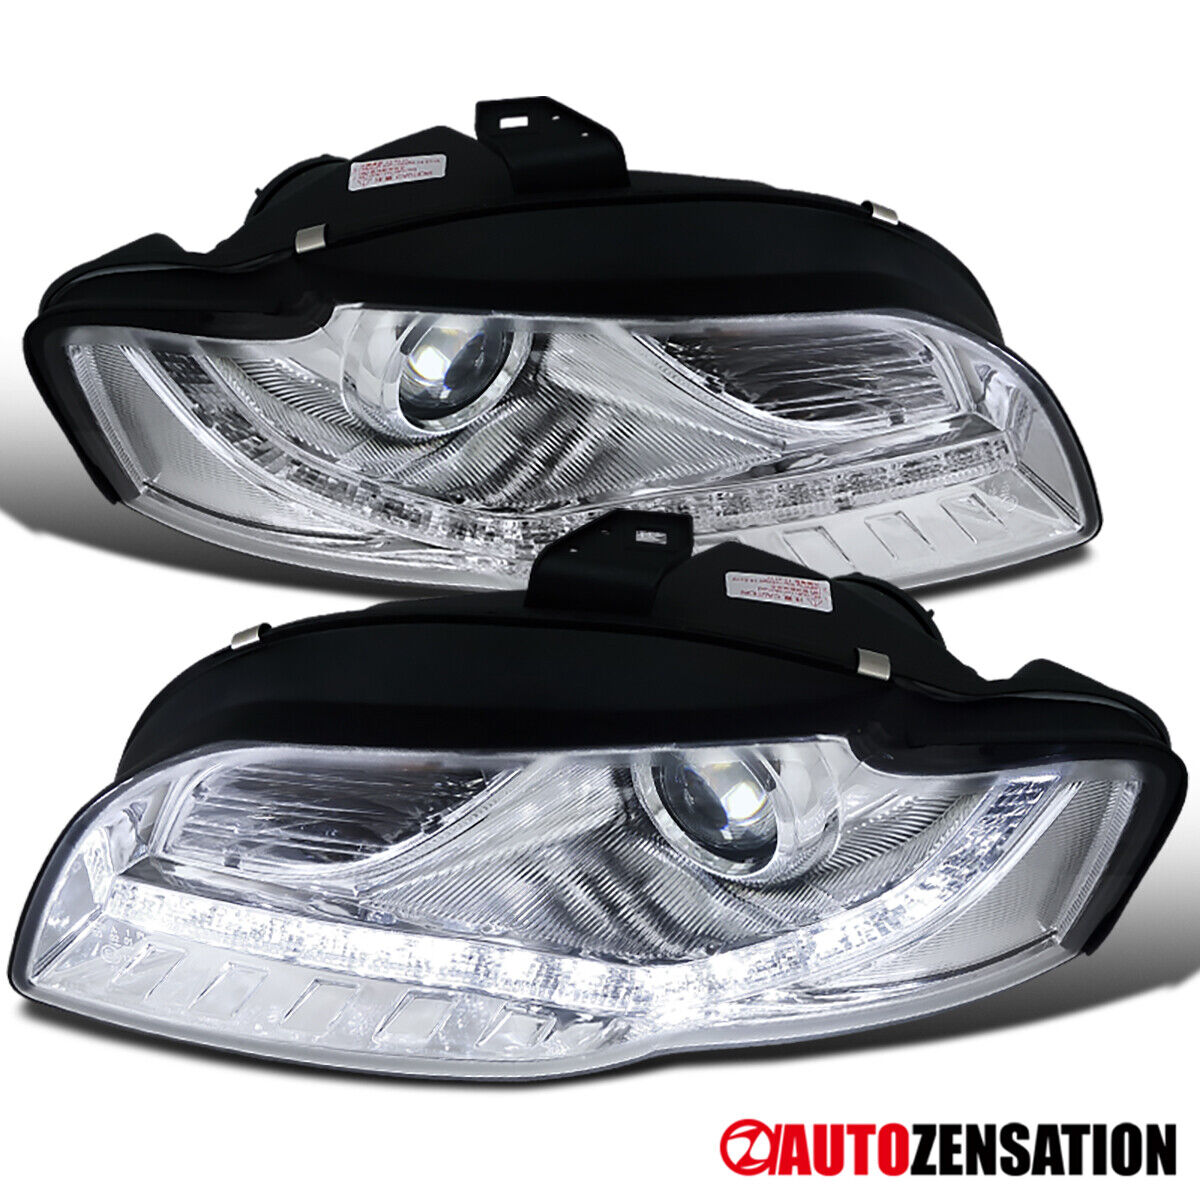 Fit 2006-2008 Audi A4 LED Strip Projector Headlights Front Headlamps Left+Right